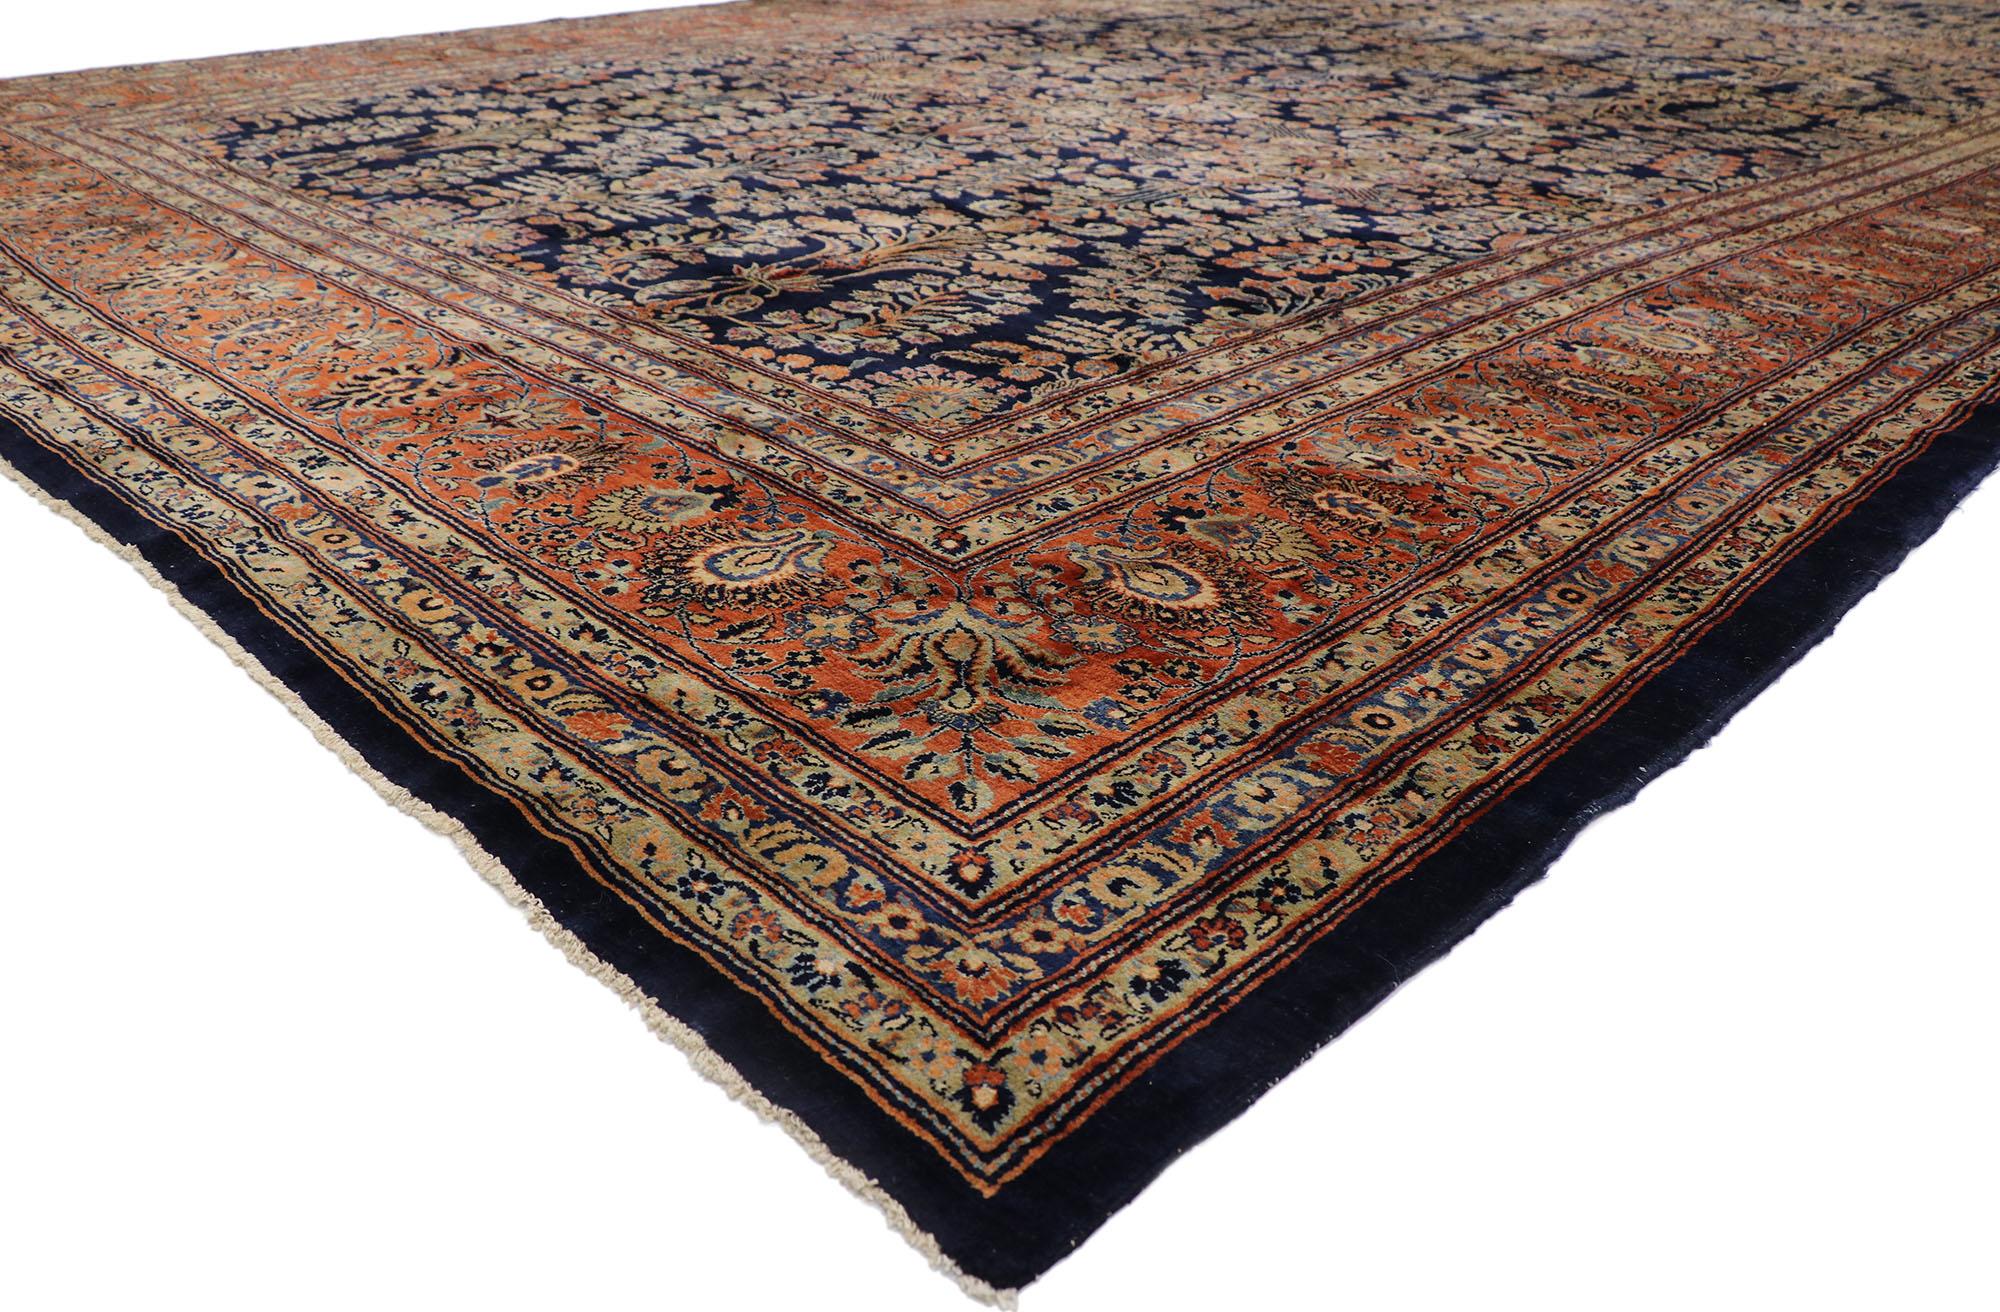 78094 Antique Persian Sarouk Mohajeran Rug with Traditional Style 13'03 x 24'01. With timeless floral design and a traditional color palette, this hand knotted wool antique Persian Mohajeran Sarouk rug is a captivating vision of woven beauty. The